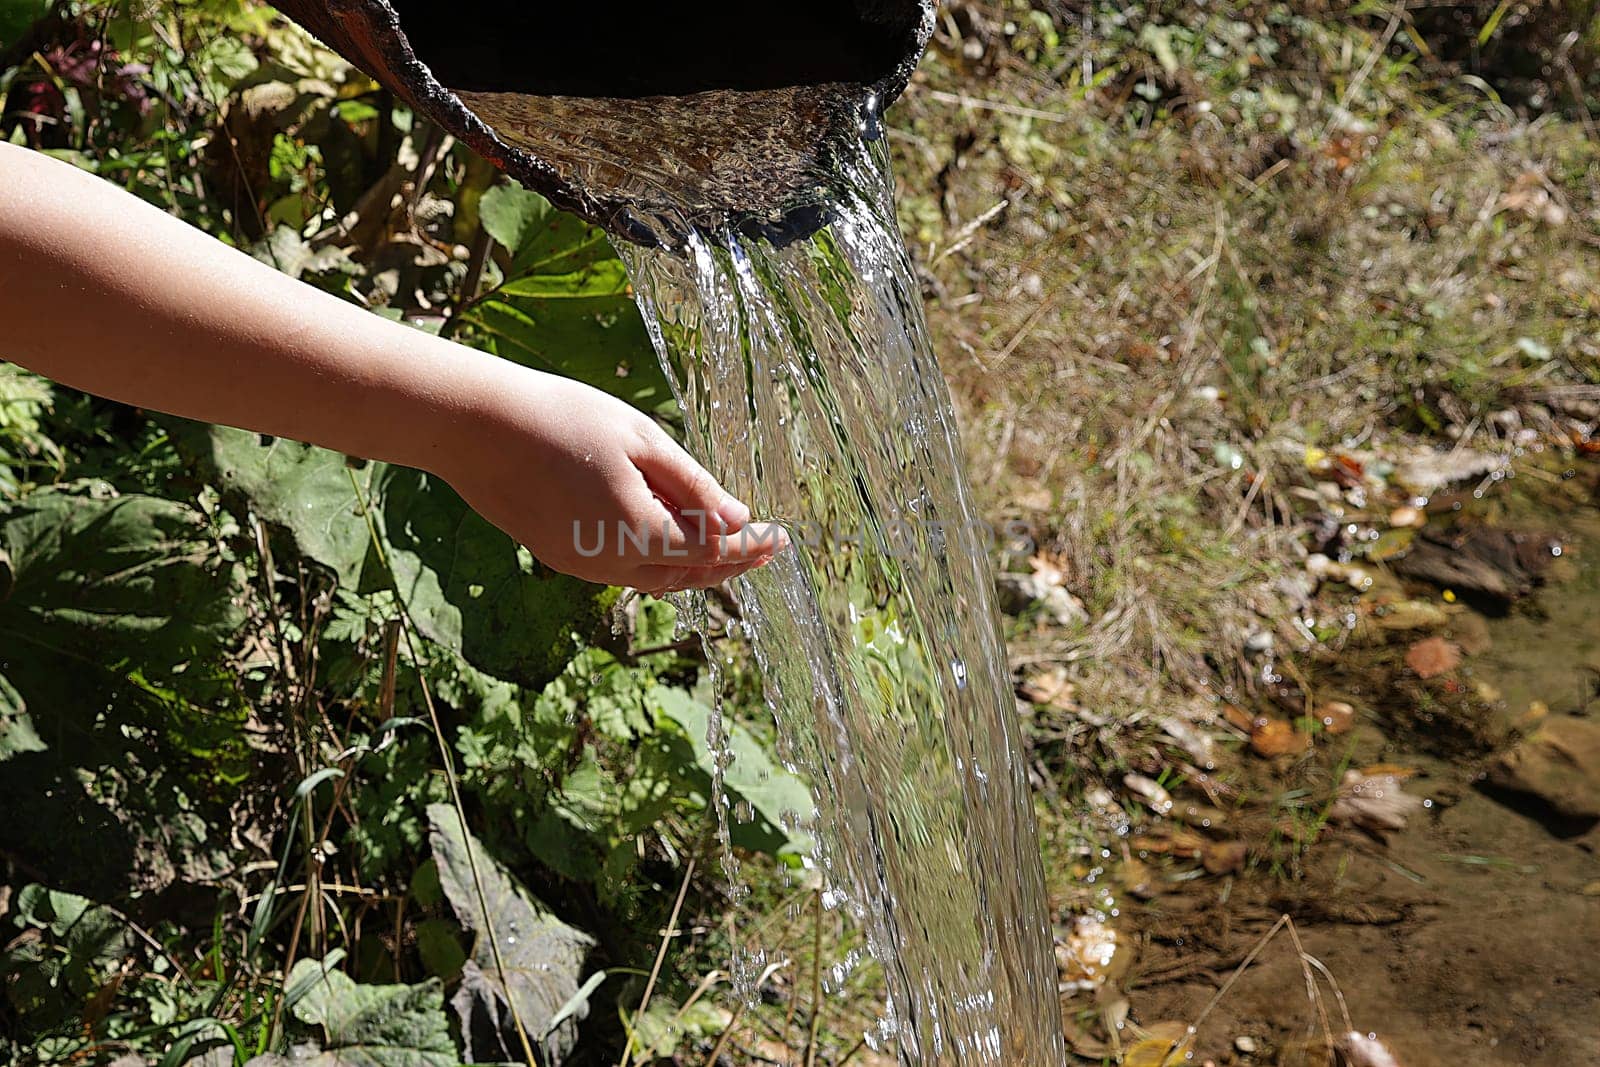 child's hand under running water. Pure running mountain water from a natural source. Water resource value concept, thirst, fresh drinking water, ecology